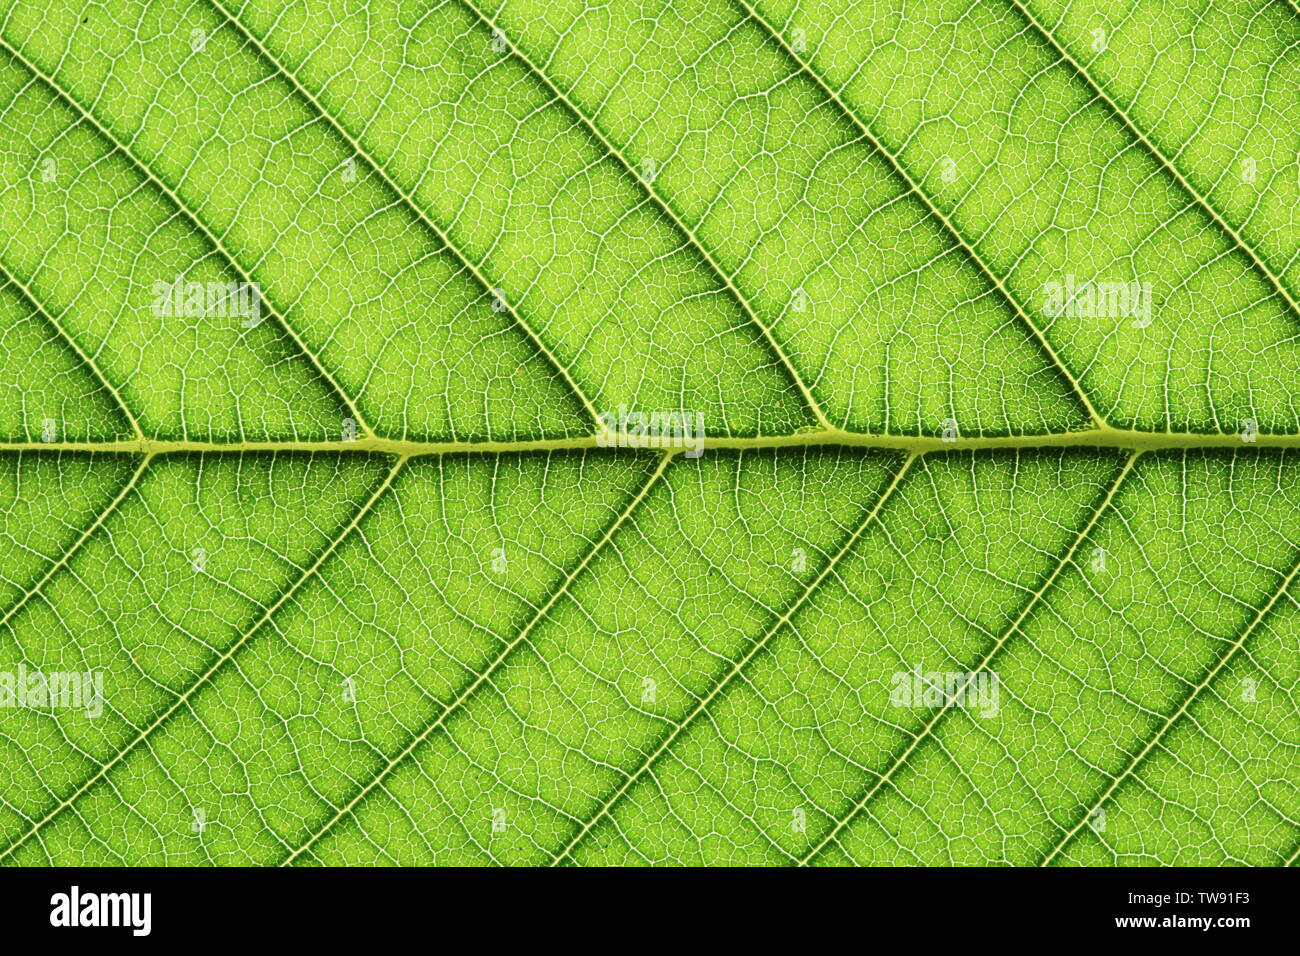 leaf vein abstract natural pattern background. diagonal stem line. green eco environmental and earth conservation concepts. Stock Photo